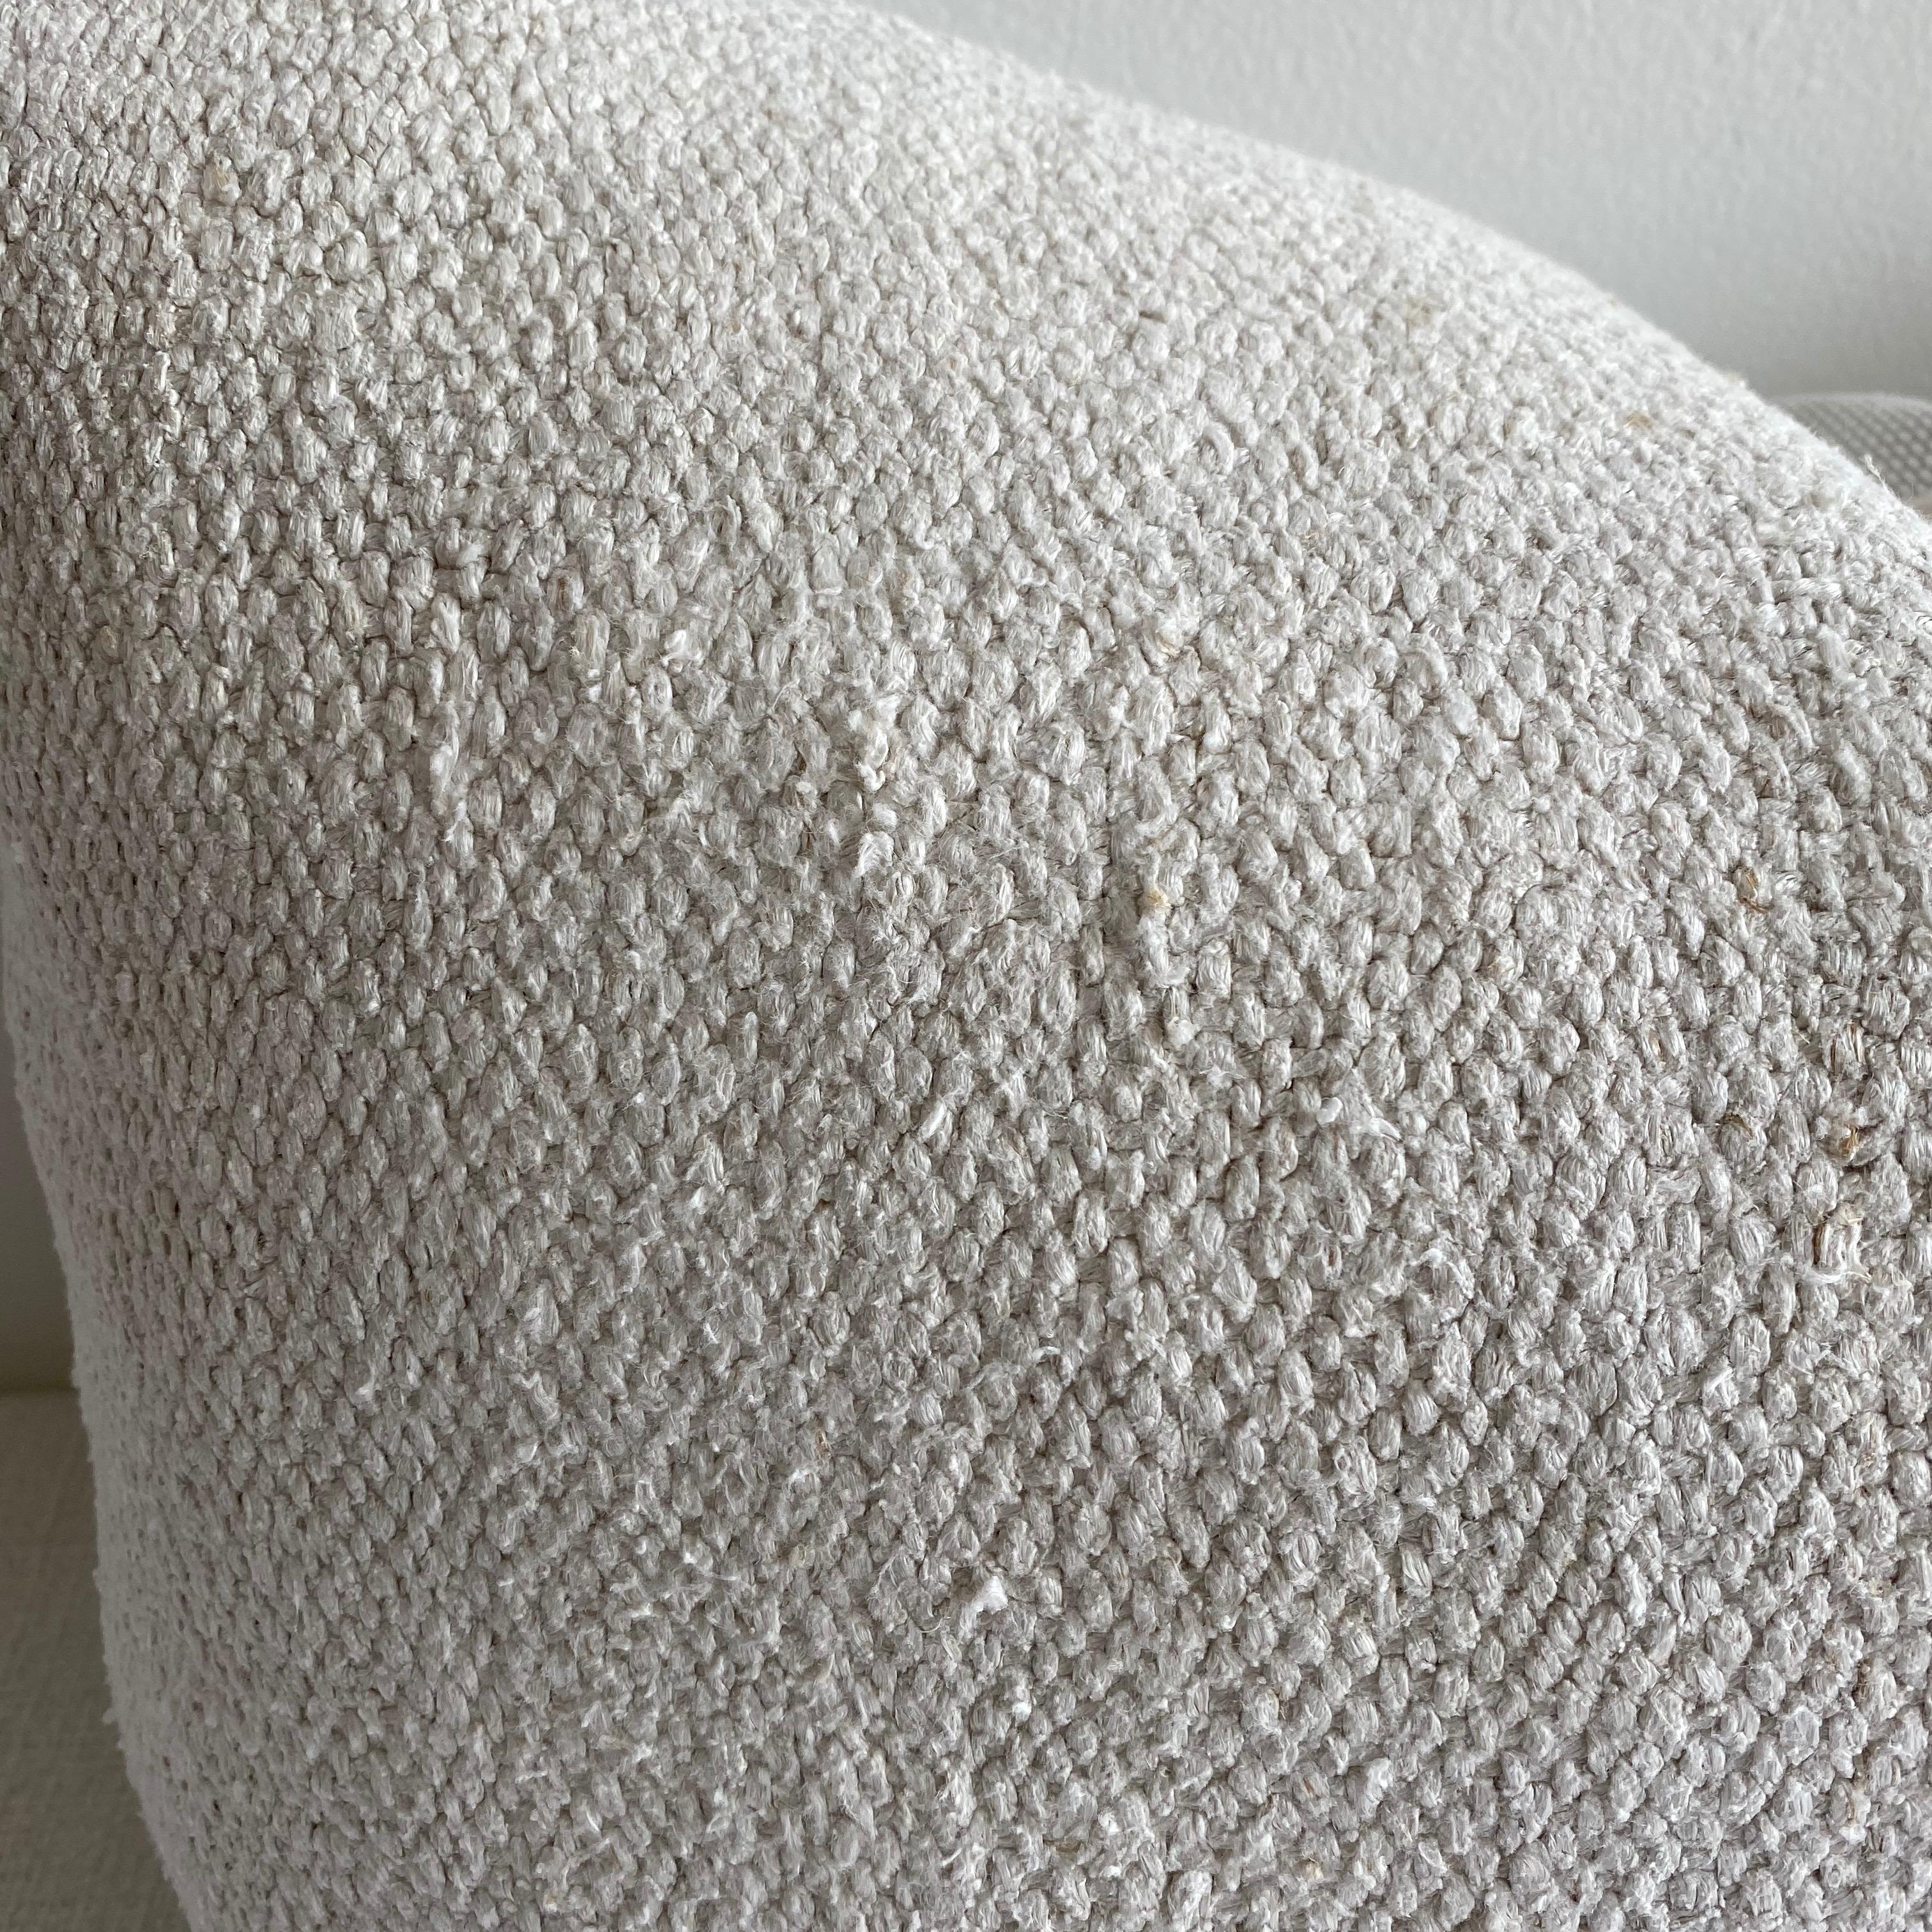 Unique pillow has been made with a Turkish rug, in multiple white tones, and some variations of white woven through. The face is fully lined, with a coordinating backing in a solid fabric, and hidden zipper closure.
Spot cleaning is recommended, or